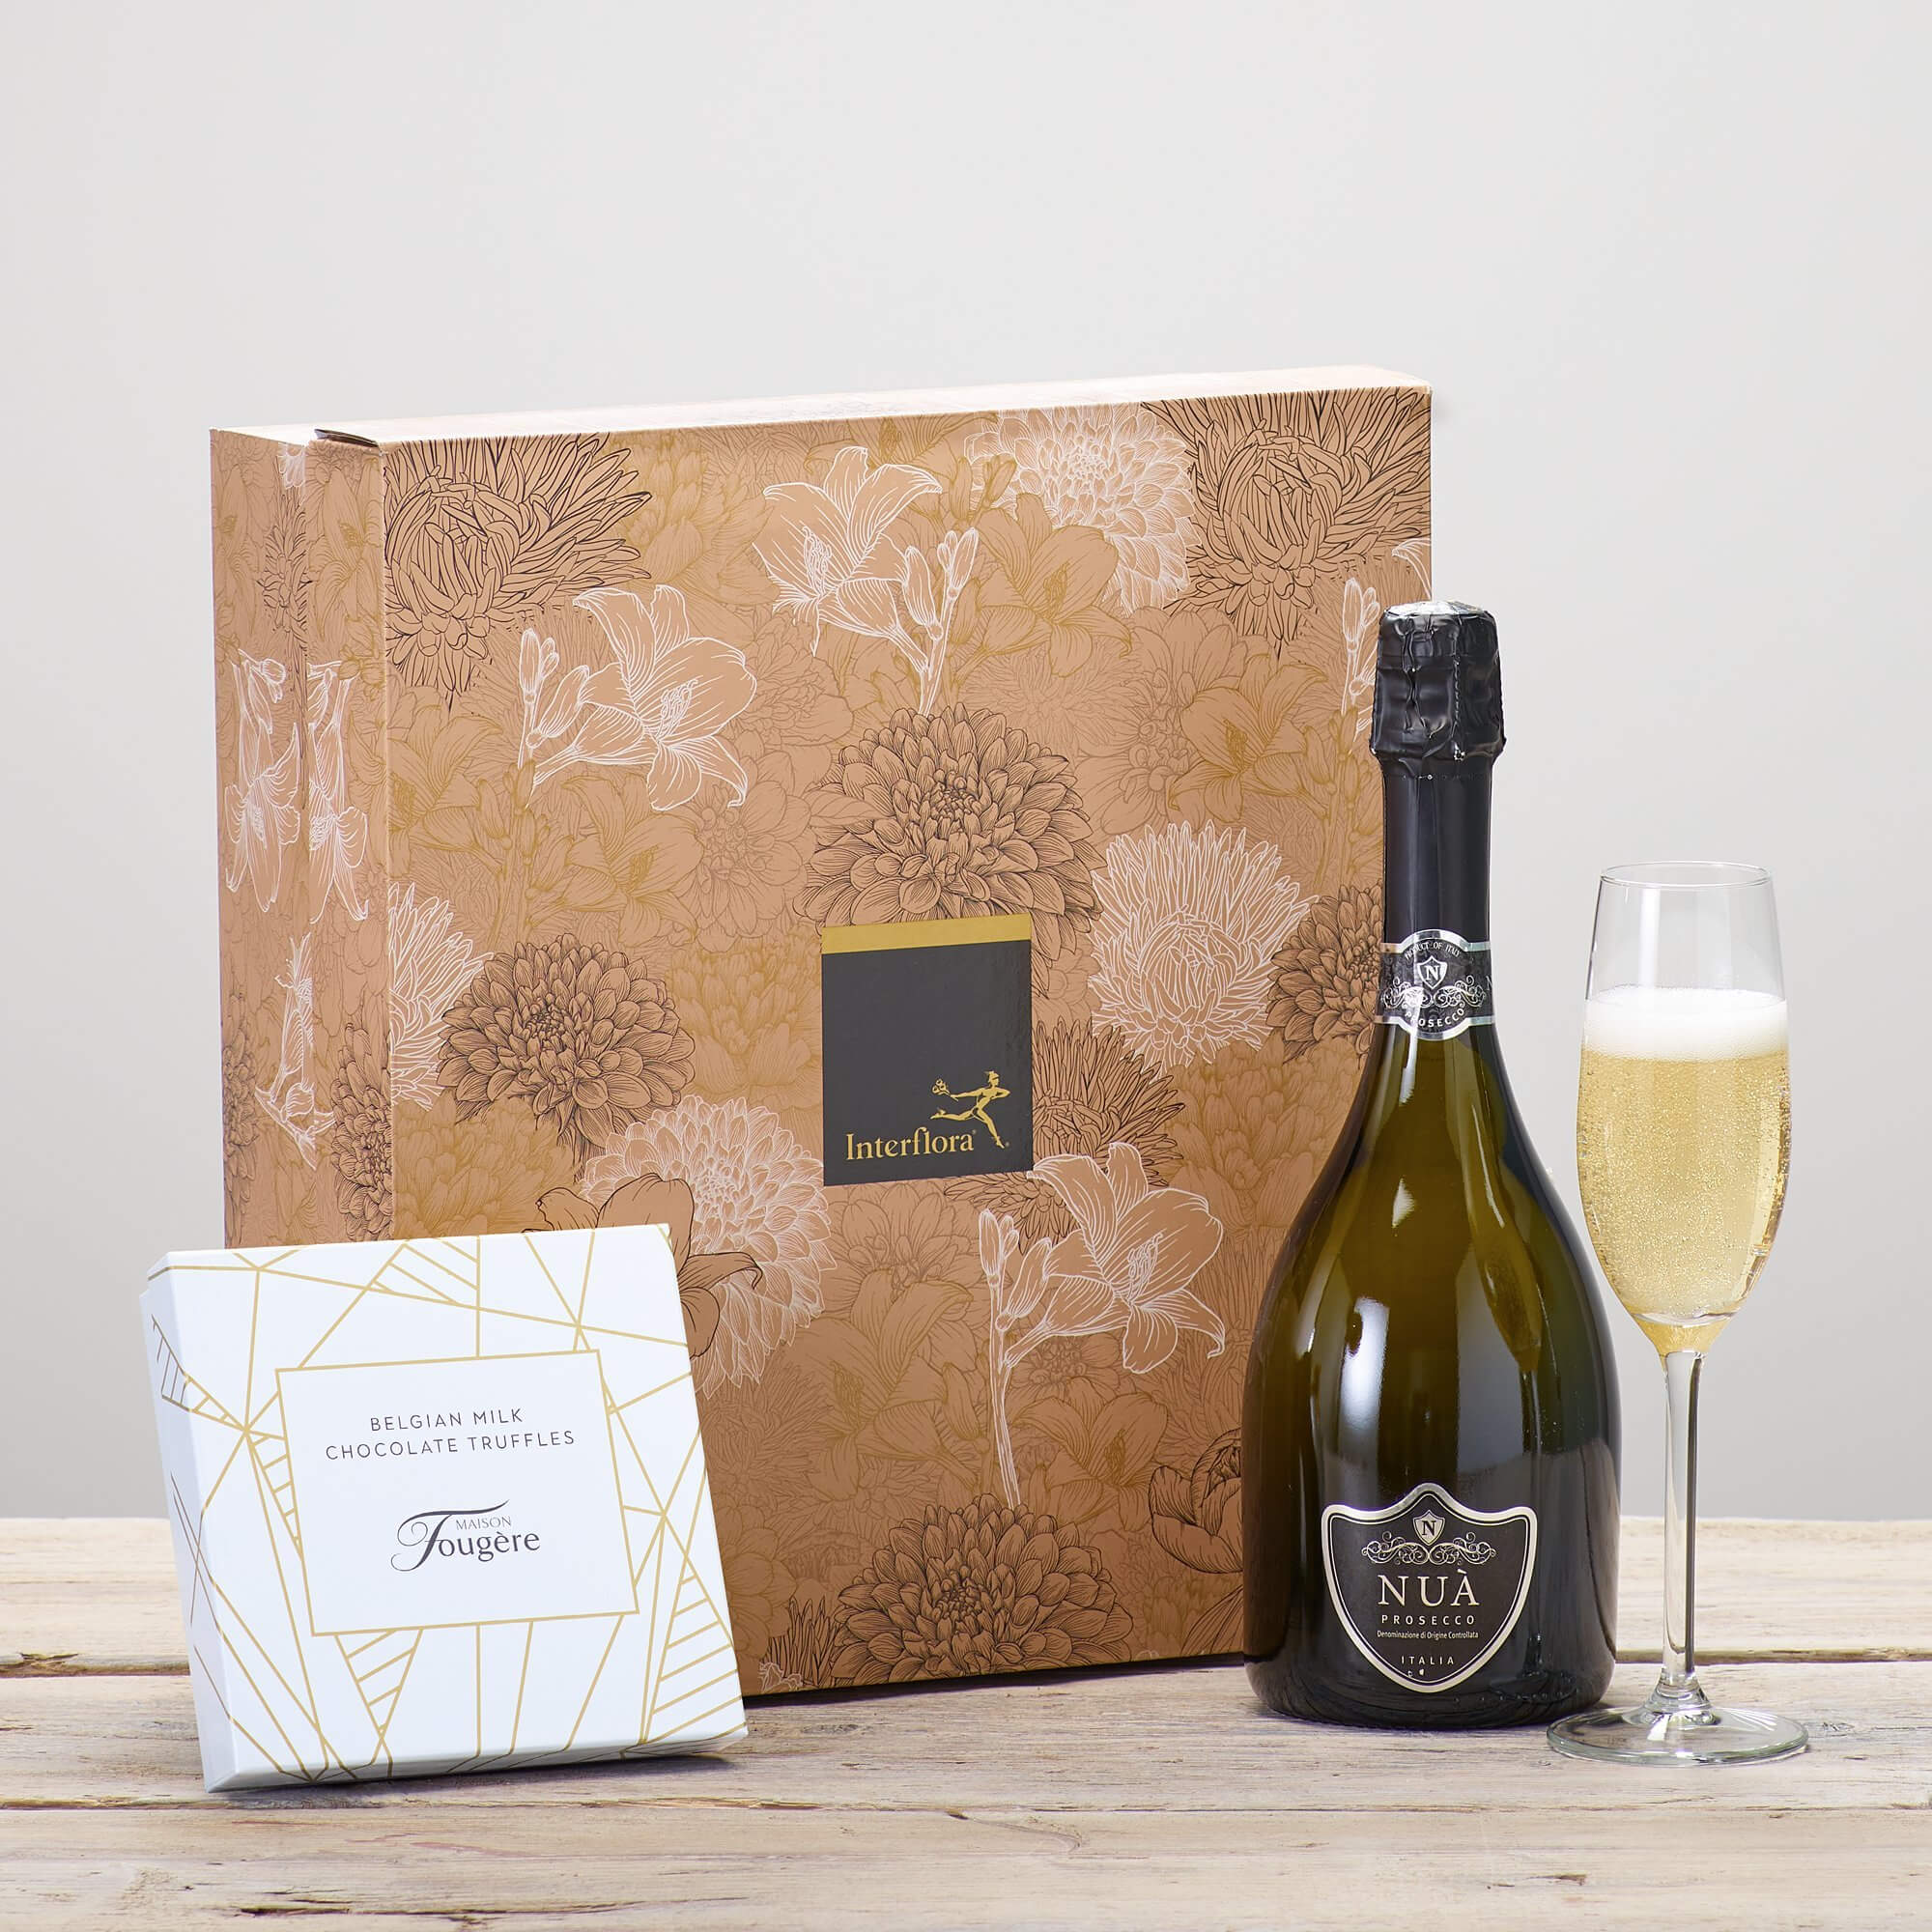 Prosecco and Chocolate Truffles Gift Set